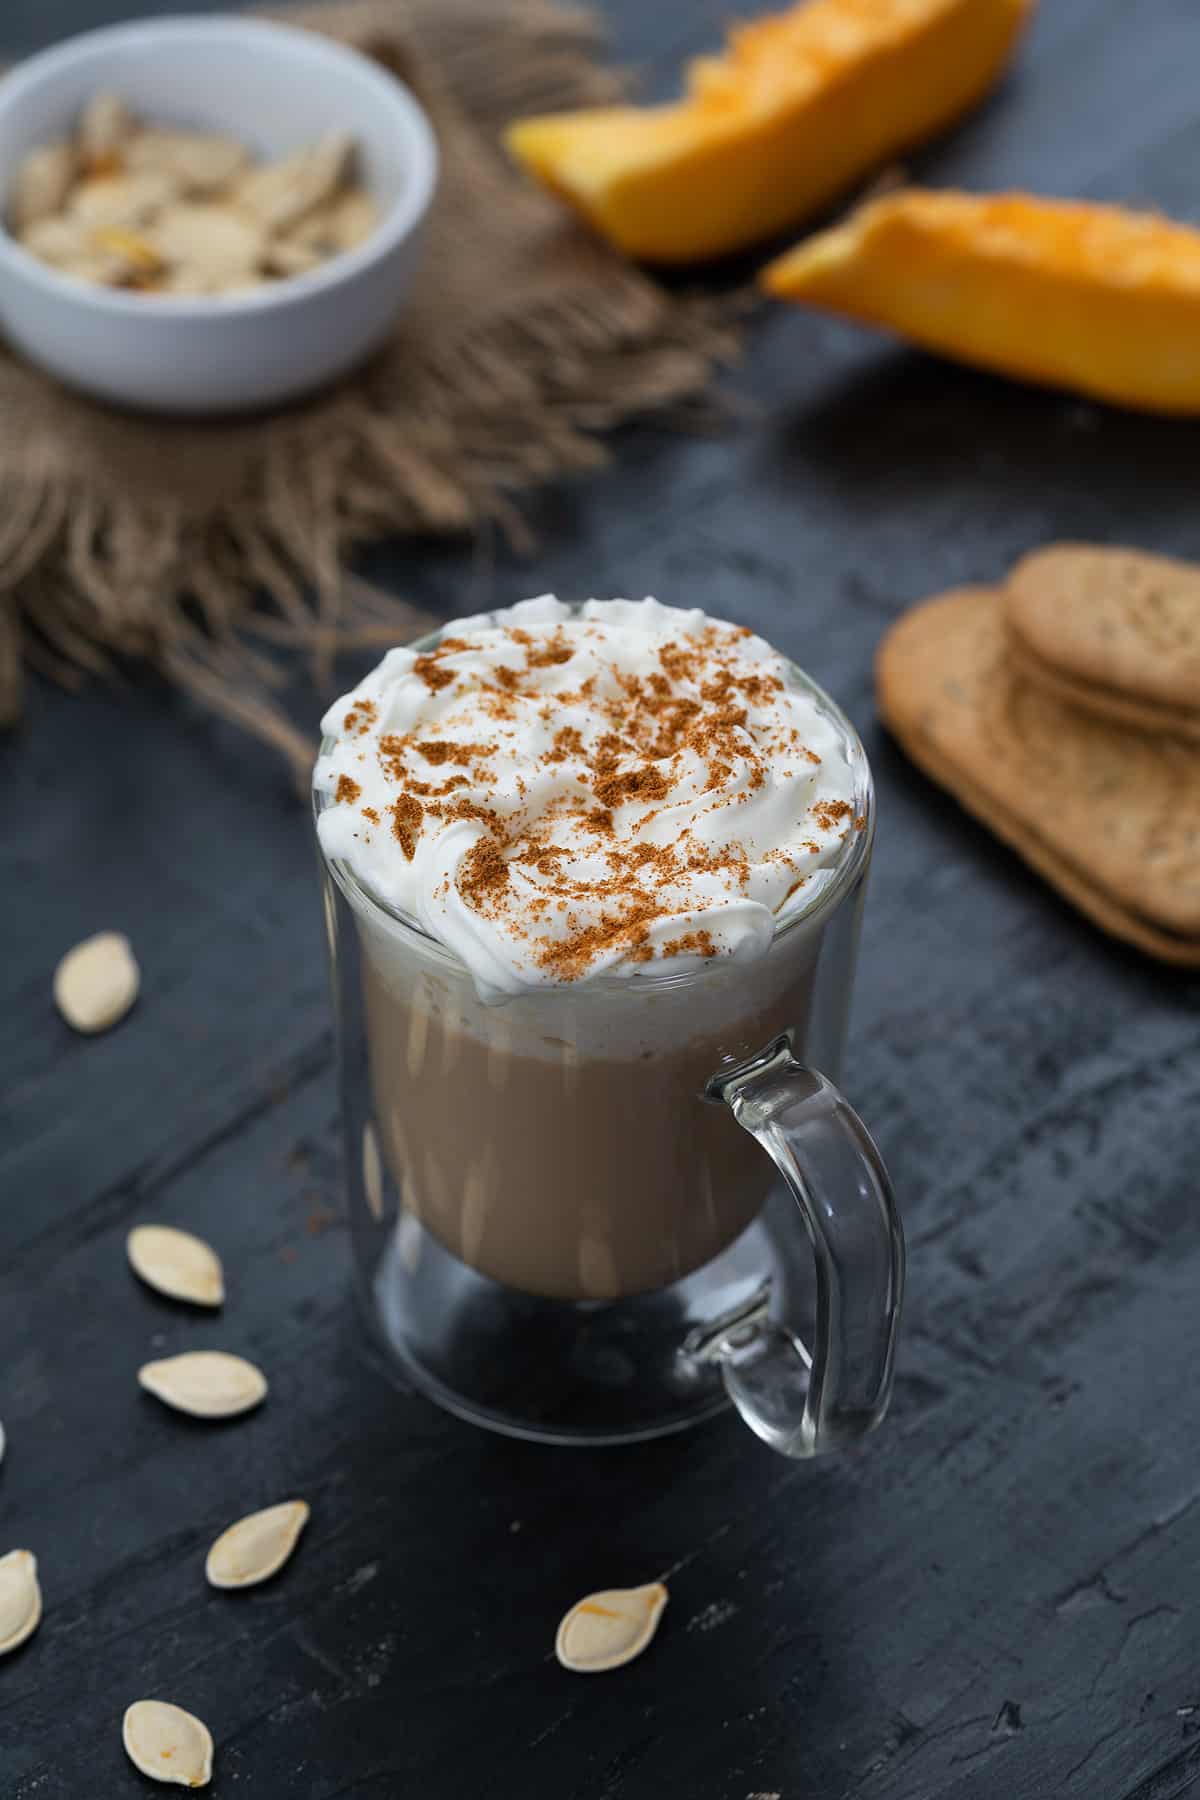 Pumpkin spice Latte served in a mug topped with whipped cream and pumpkin spice powder.